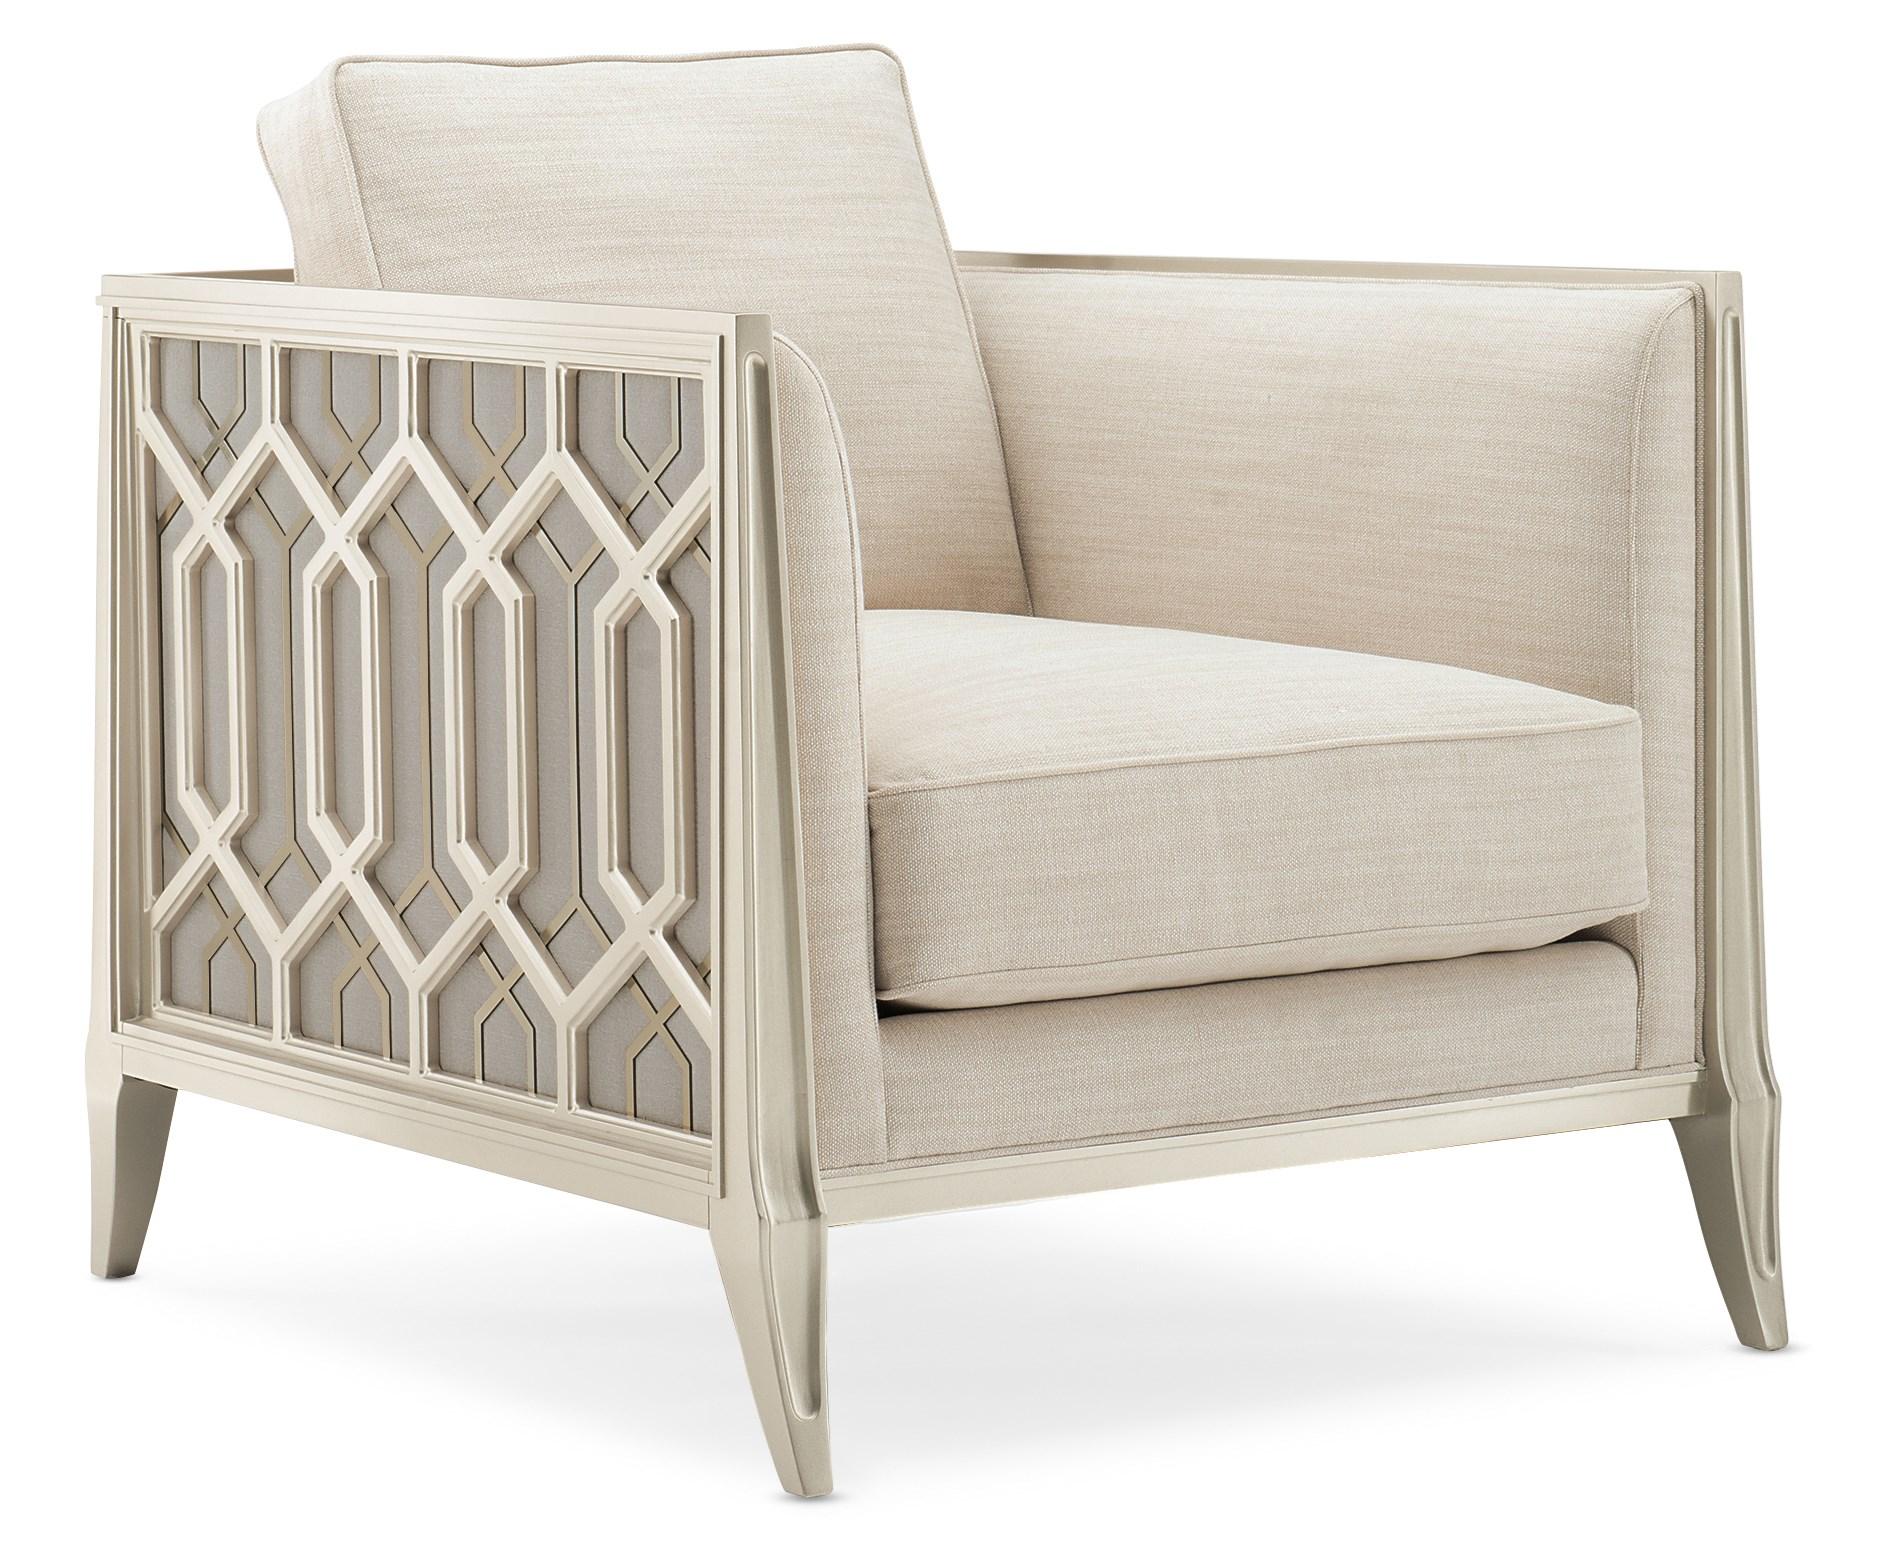 

    
Champagne Gold Metal Fretwork & Wood Accent Chairs & Cabinet Set 3Pcs JUST DUET by Caracole
